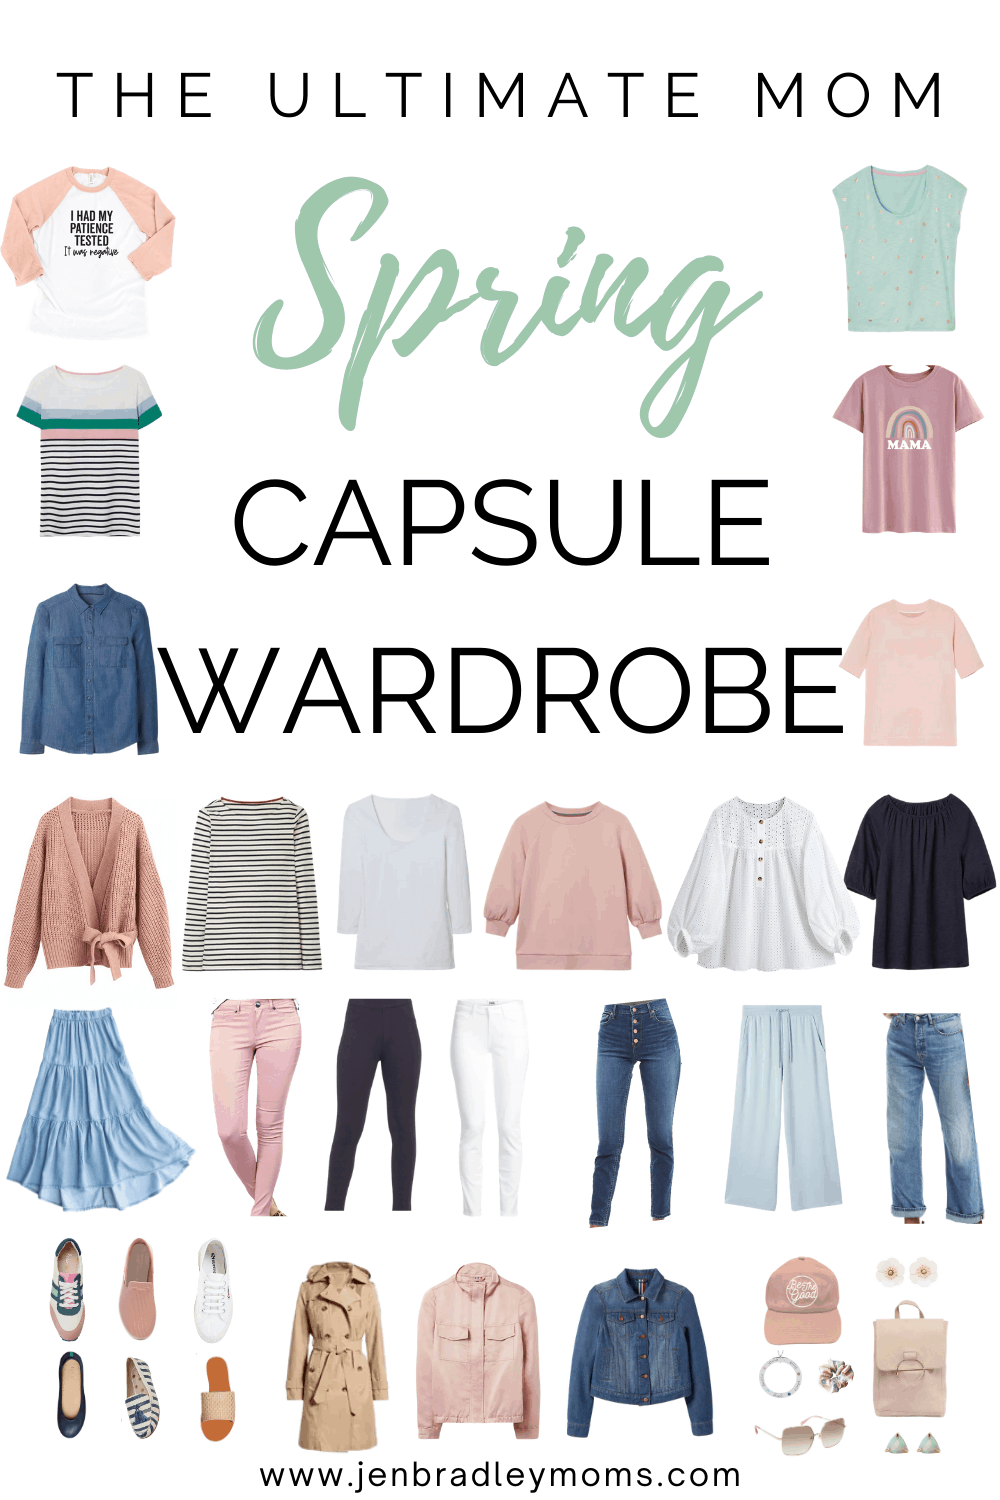 Spring Capsule Wardrobe: 35 Amazing Pieces You Need in Your Closet